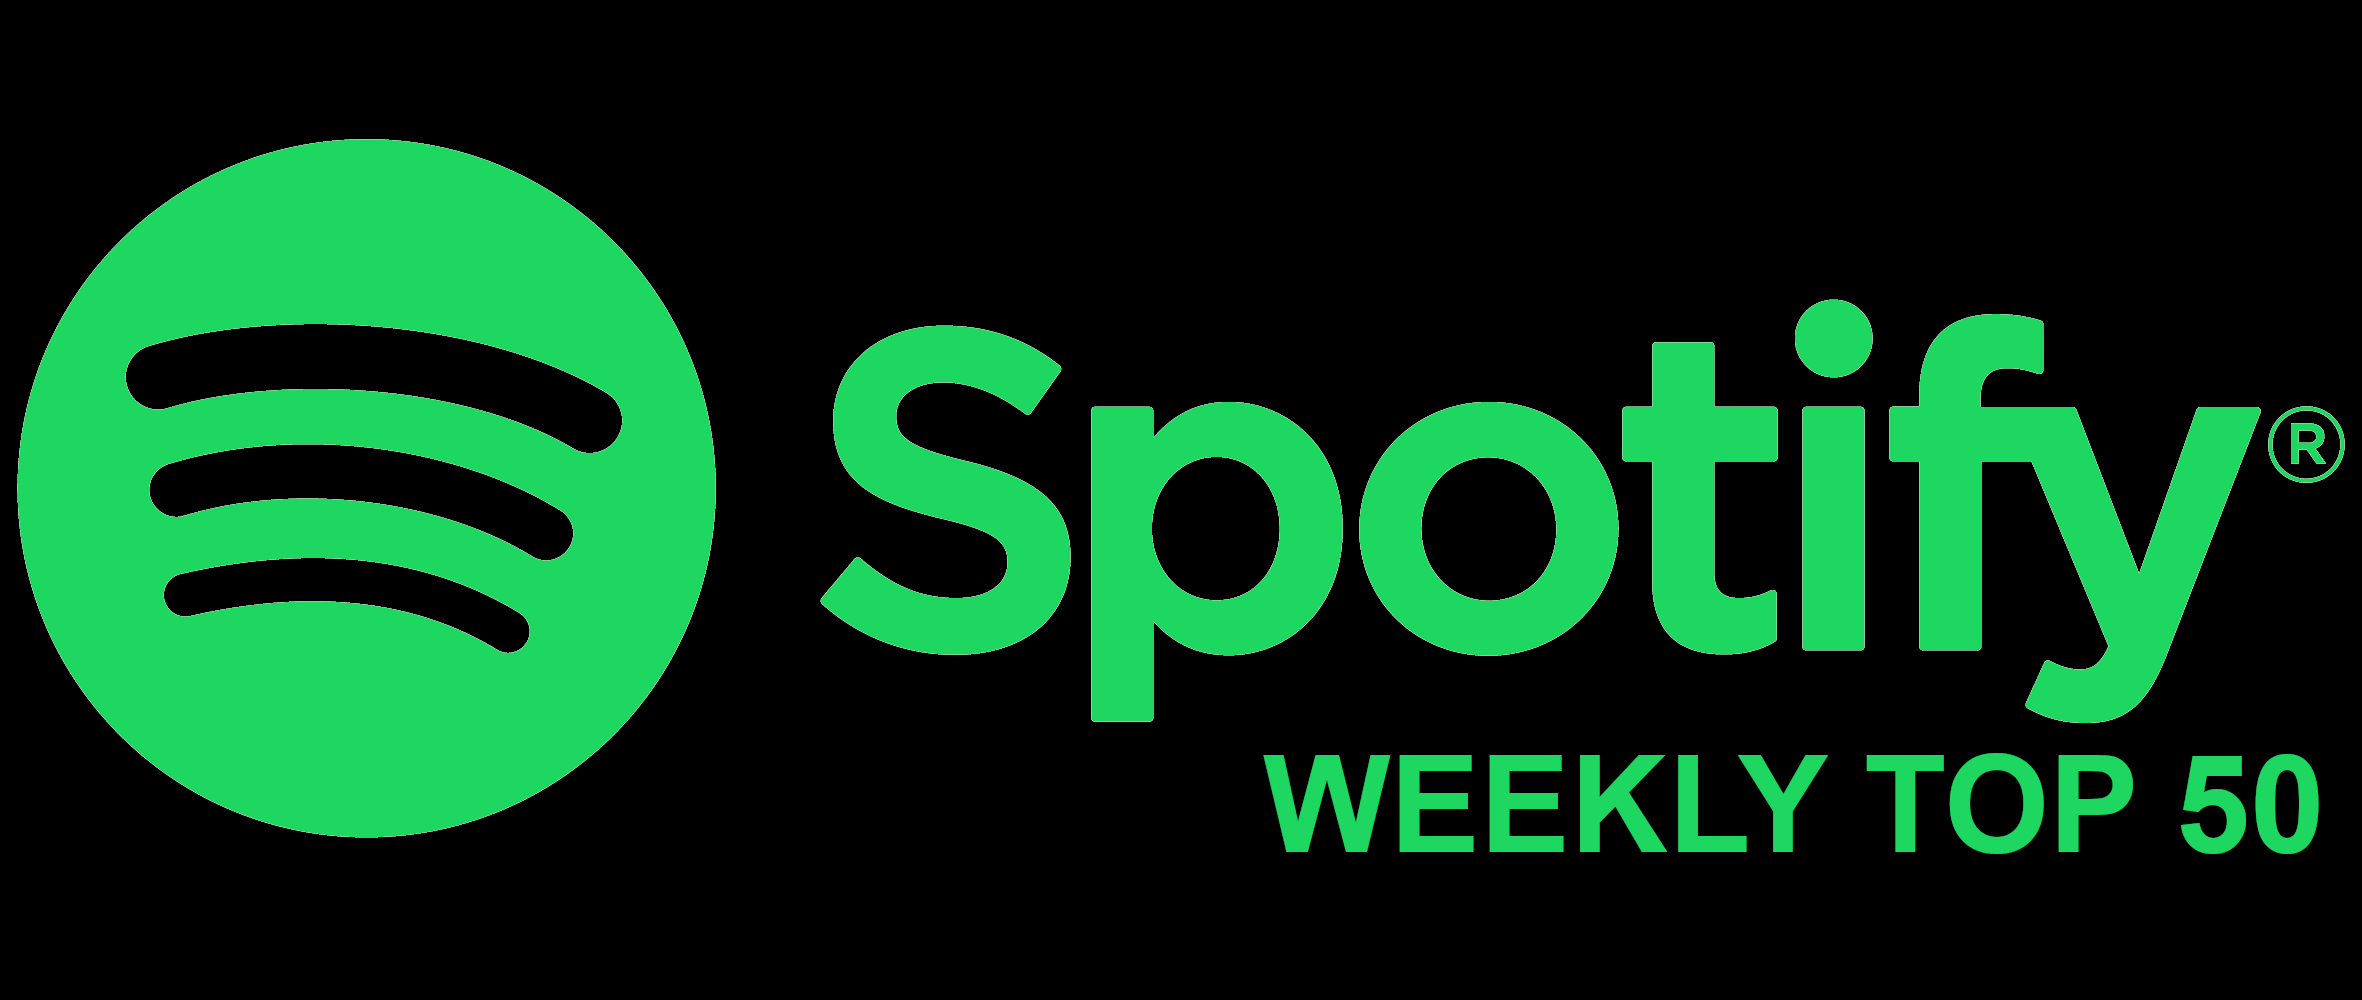 【Spotify Charts】 WEEKLY TOP 50